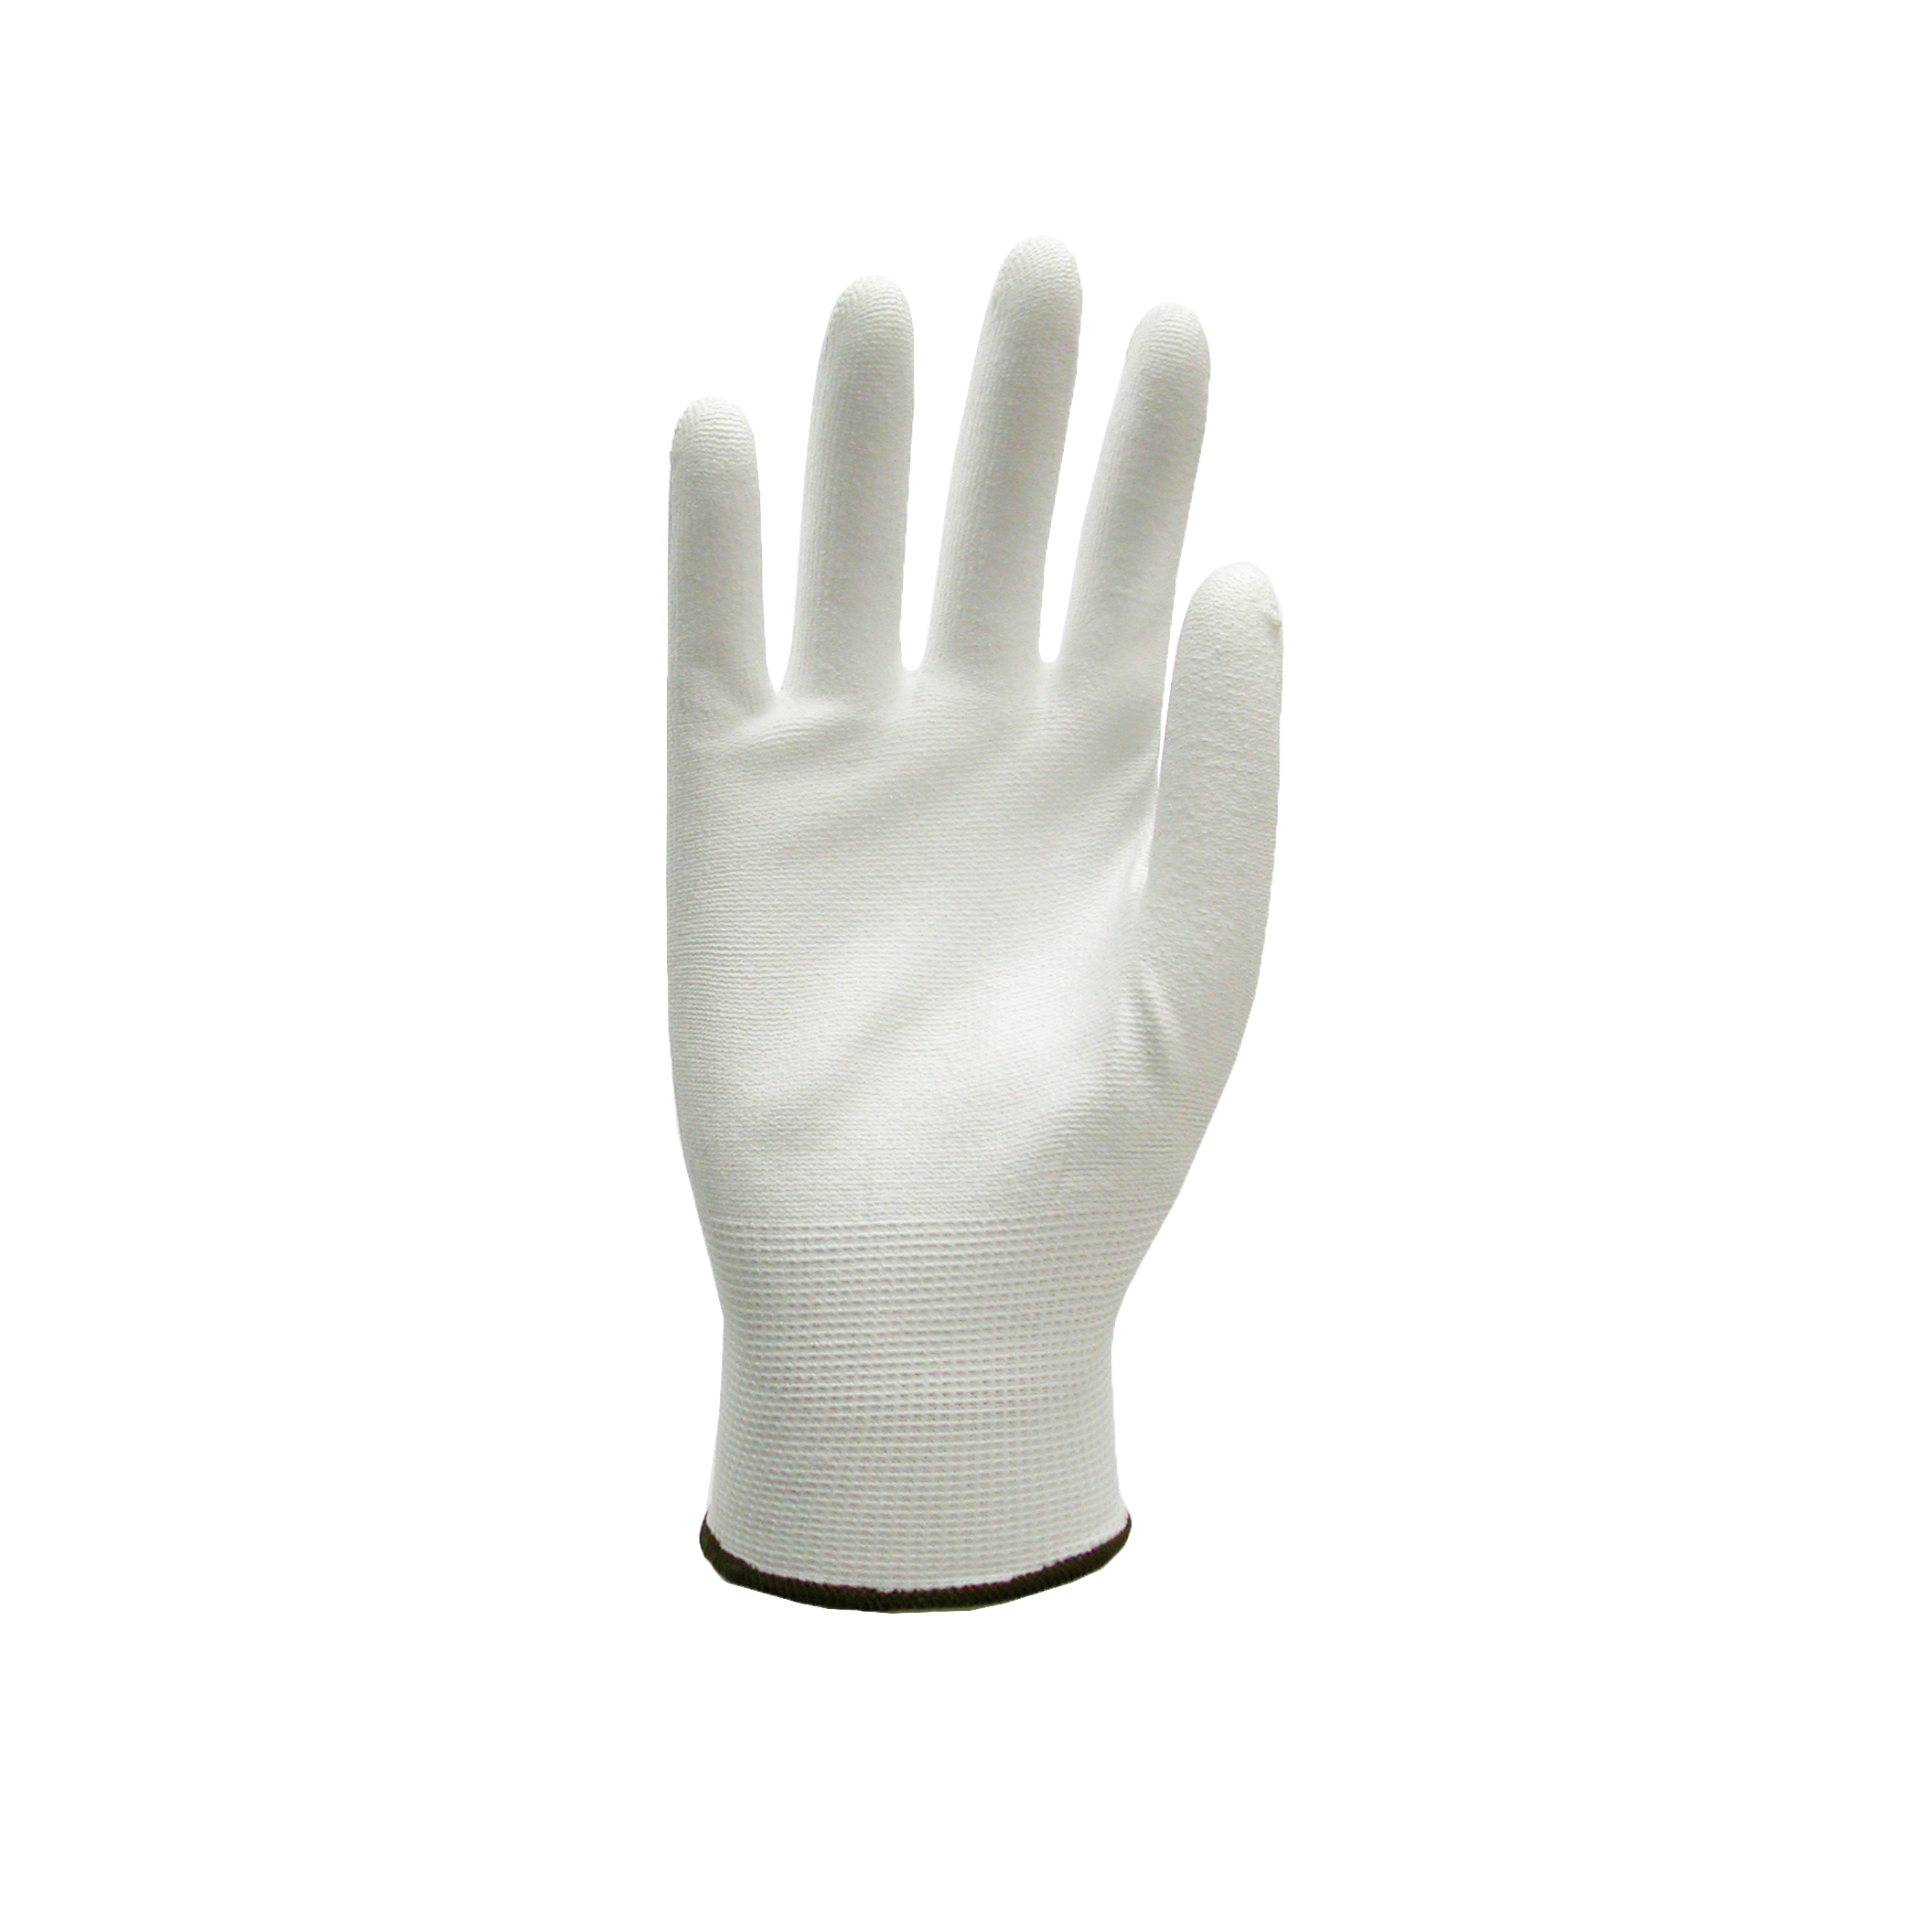 Hand Gloves Protection - Safetyware Coated Polyurethane